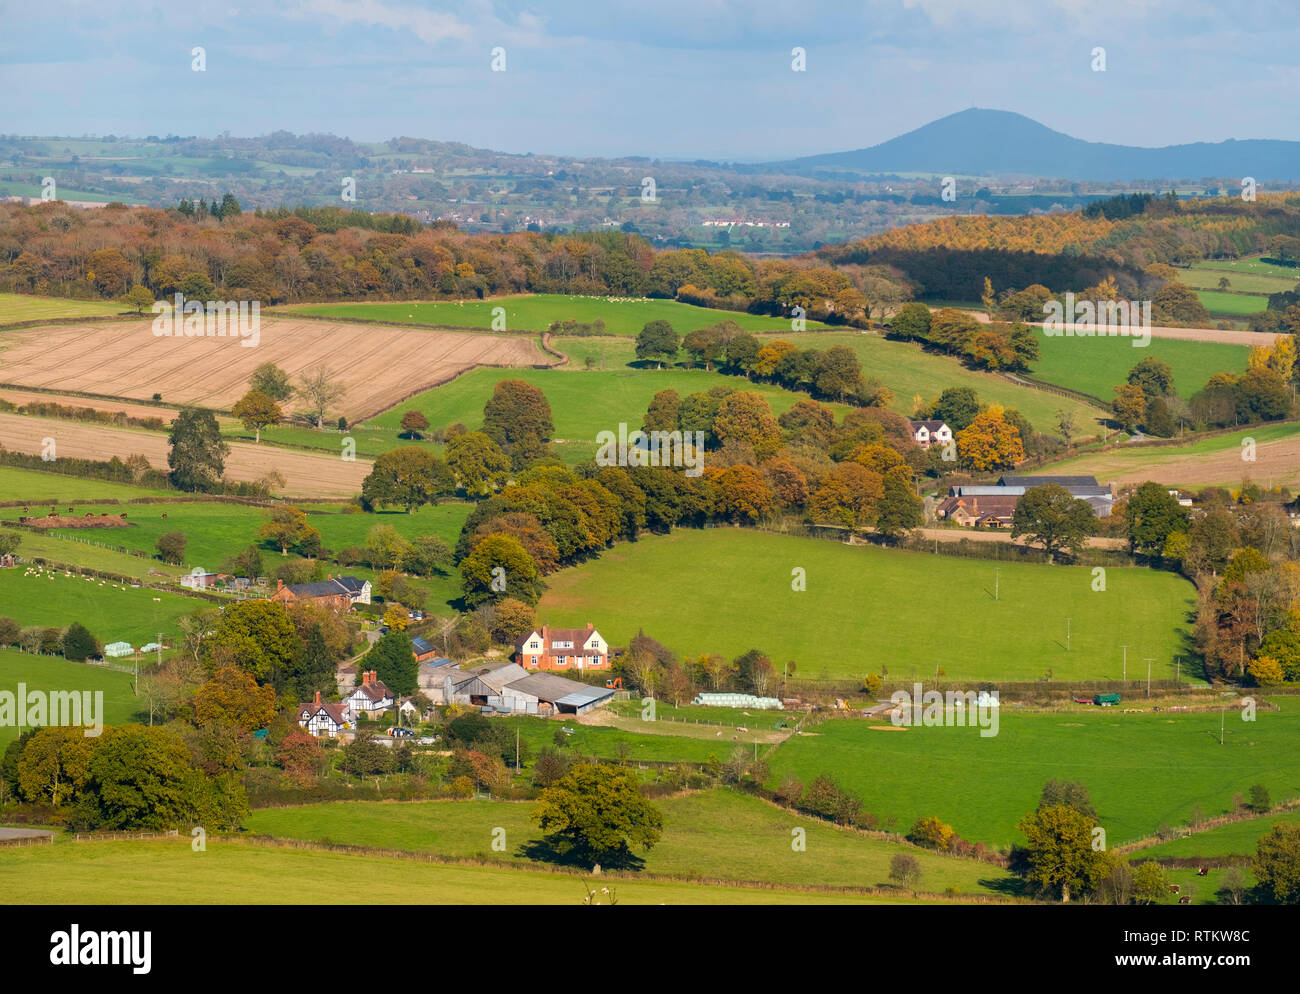 View over South Shropshire countryside looking to the Wrekin from Flounders Folly tower on Callow Hill near Craven Arms, Shropshire, England, UK. Stock Photo